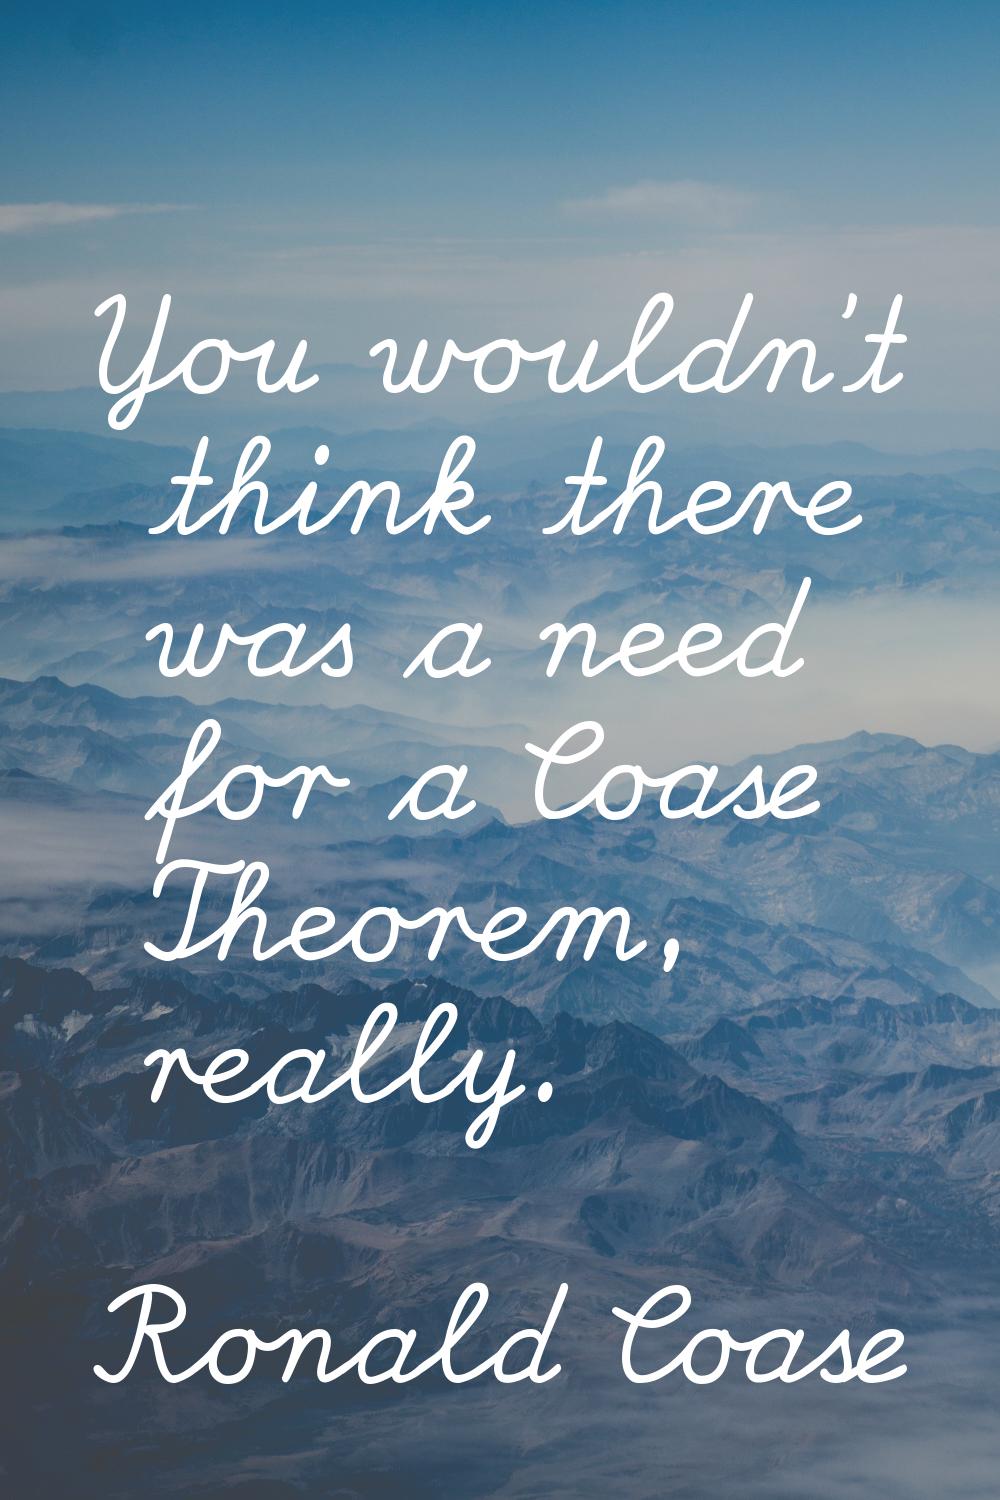 You wouldn't think there was a need for a Coase Theorem, really.